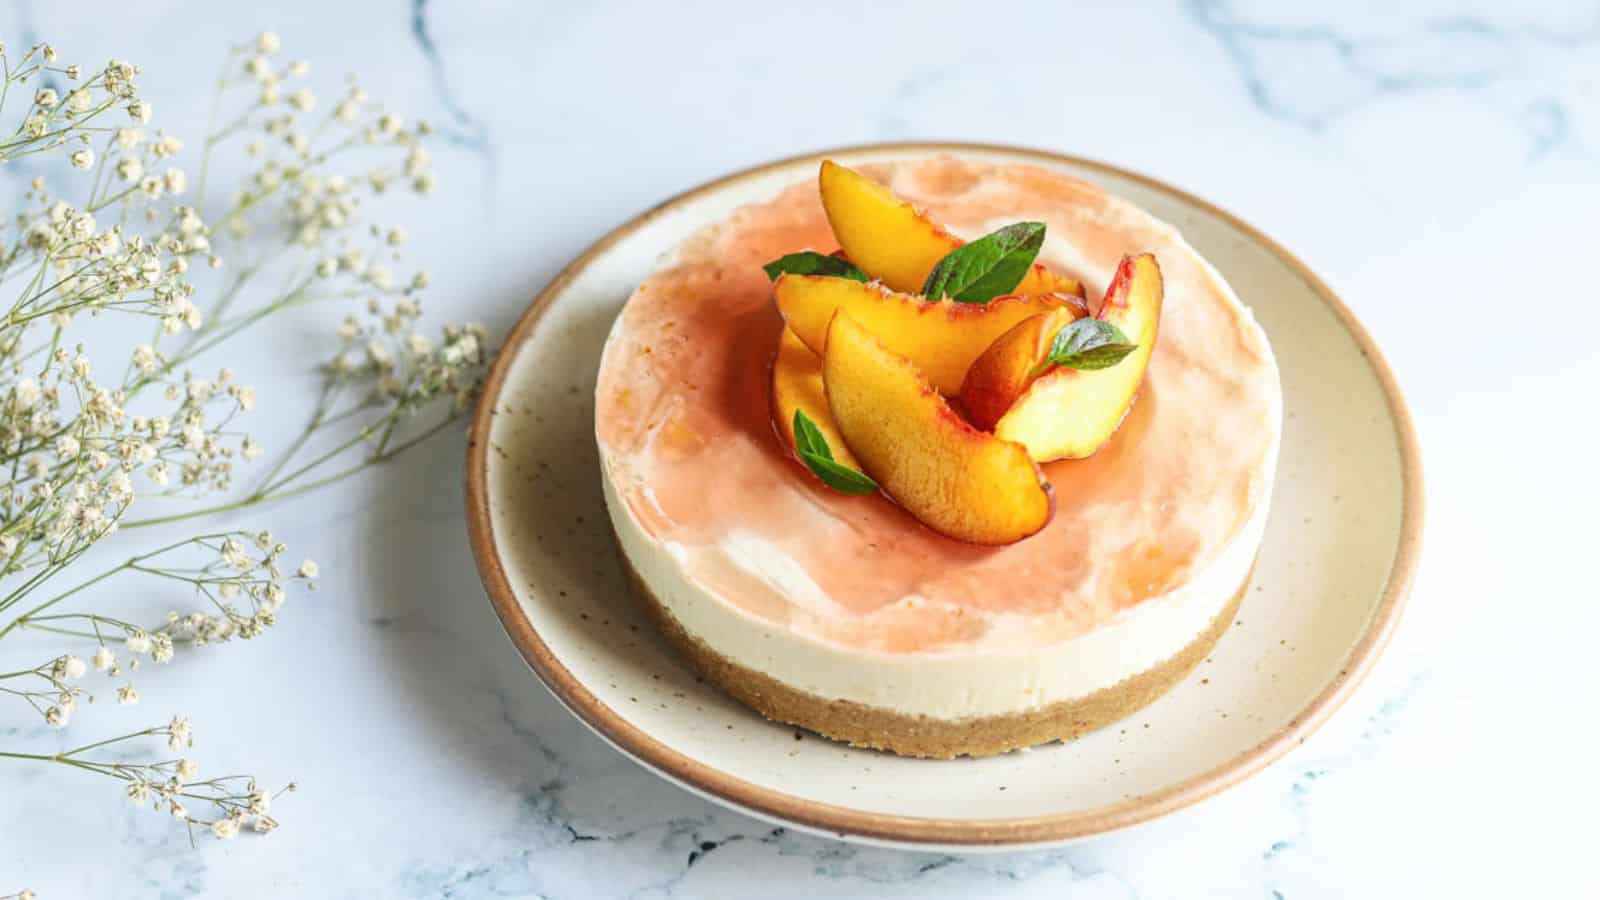 <p>Indulge in a guilt-free dessert with Vegan No-Bake Cheesecake with Peaches (Gluten-Free), a creamy and delicious treat that’s perfect for summer. Made with cashews, coconut milk, and fresh peaches, this cheesecake is a refreshing indulgence. Treat yourself to this surprising dessert that will hit the spot every time you’re craving something sweet and satisfying.<br><strong>Get the Recipe: </strong><a href="https://twocityvegans.com/gluten-free-vegan-no-bake-cheesecake-peaches/?utm_source=msn&utm_medium=page&utm_campaign=msn">Vegan No-Bake Cheesecake with Peaches (Gluten-Free)</a></p>